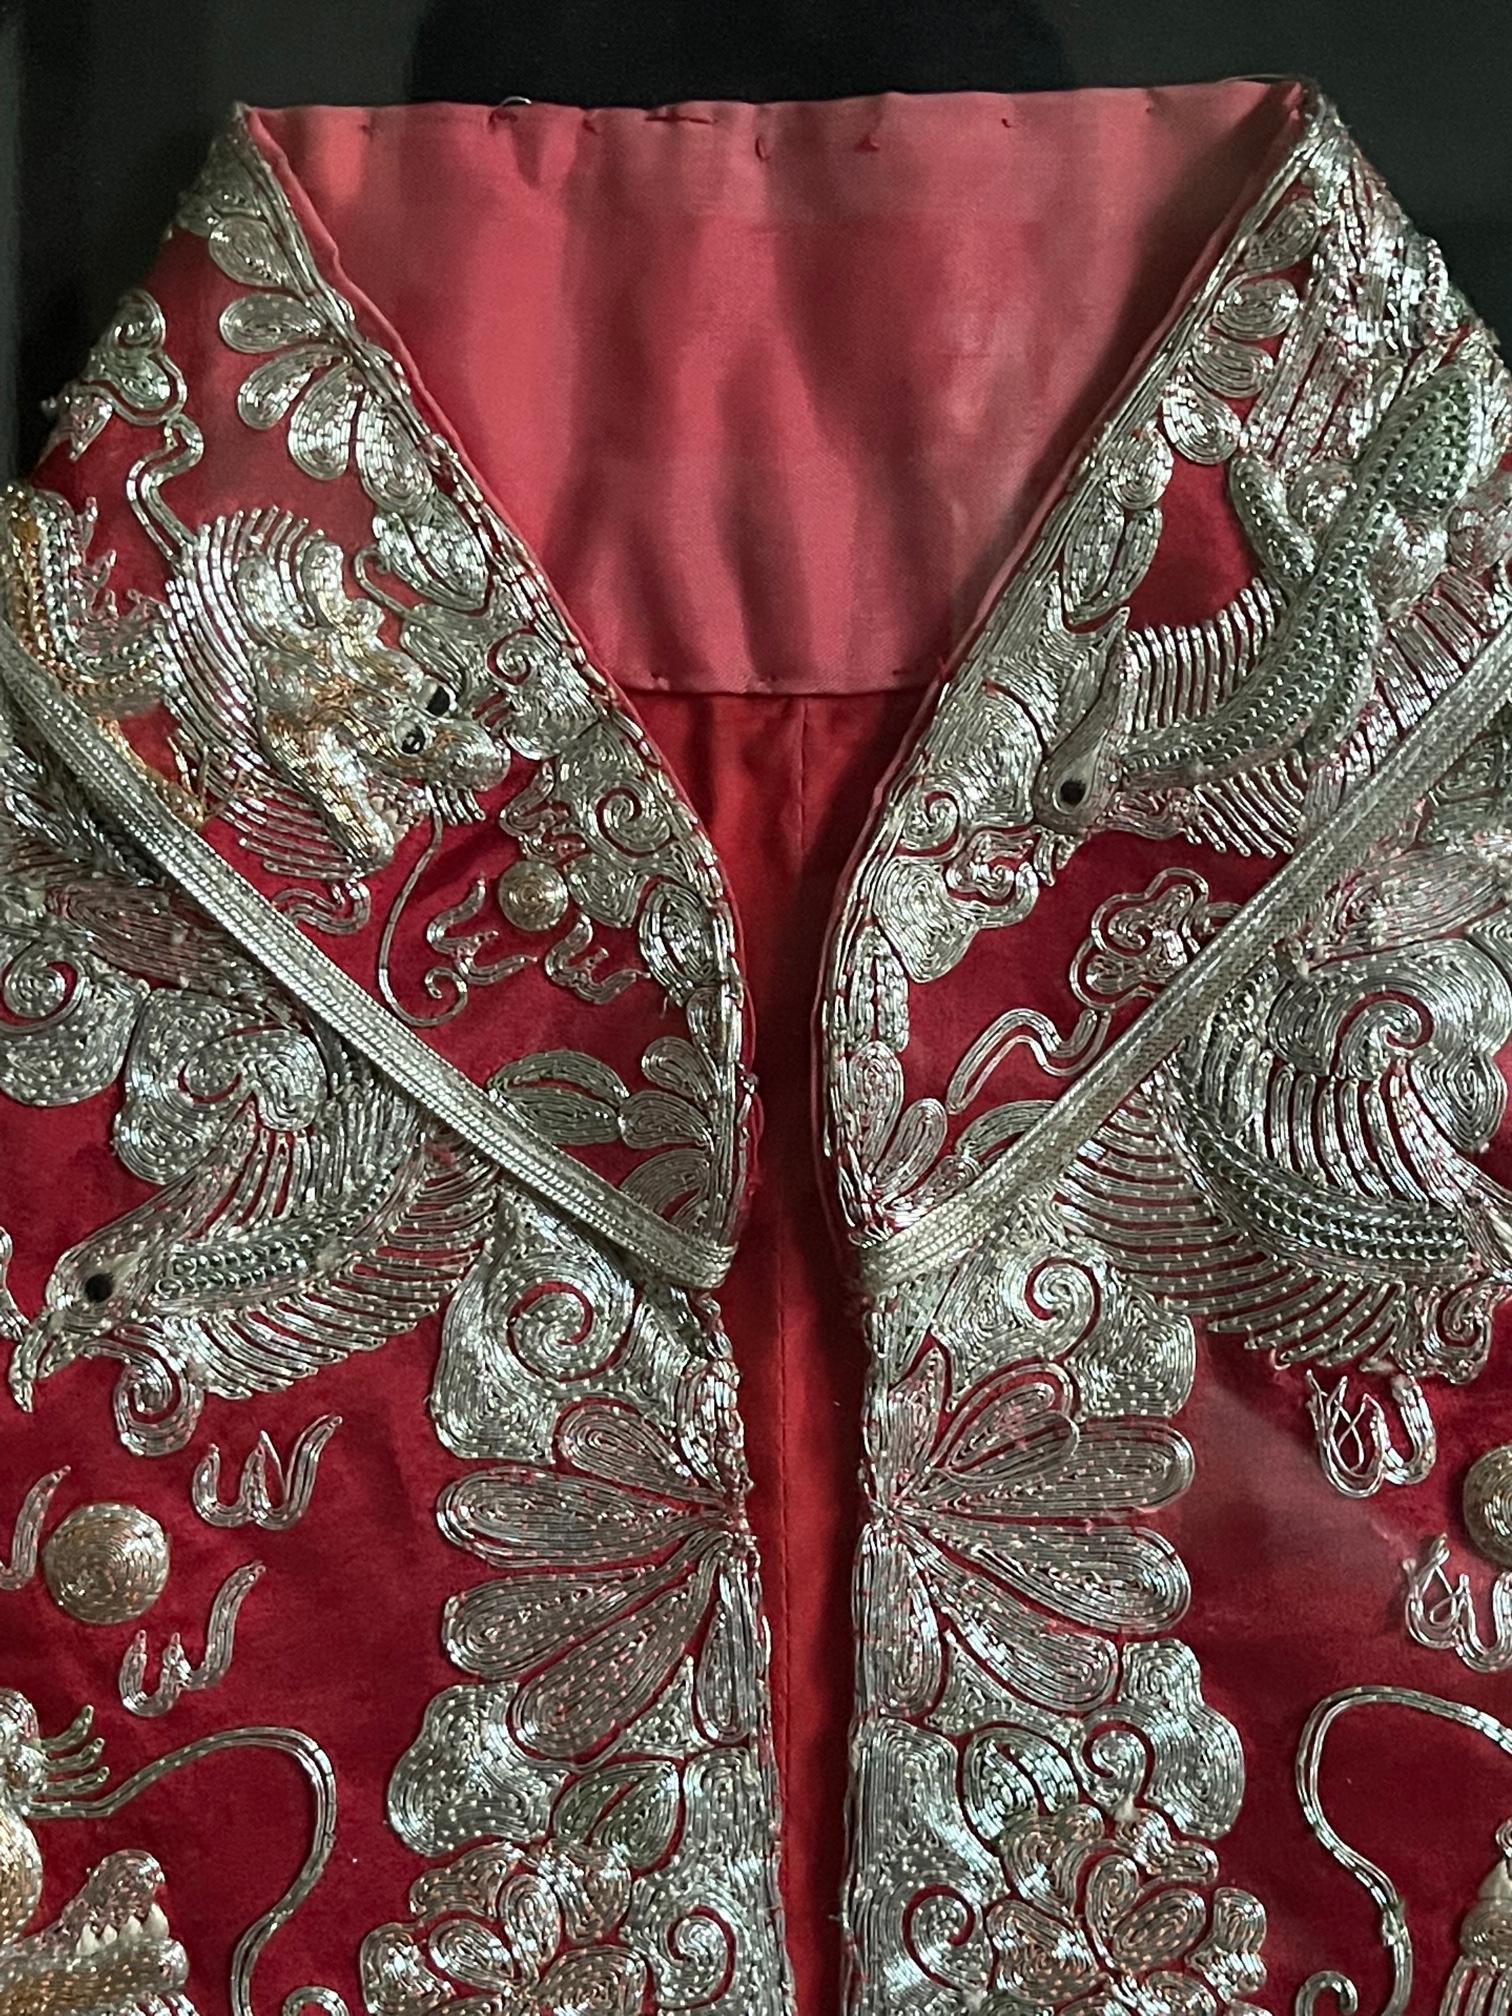 Framed Chinese Embroidery Southern Bridal Jacket In Good Condition For Sale In Atlanta, GA